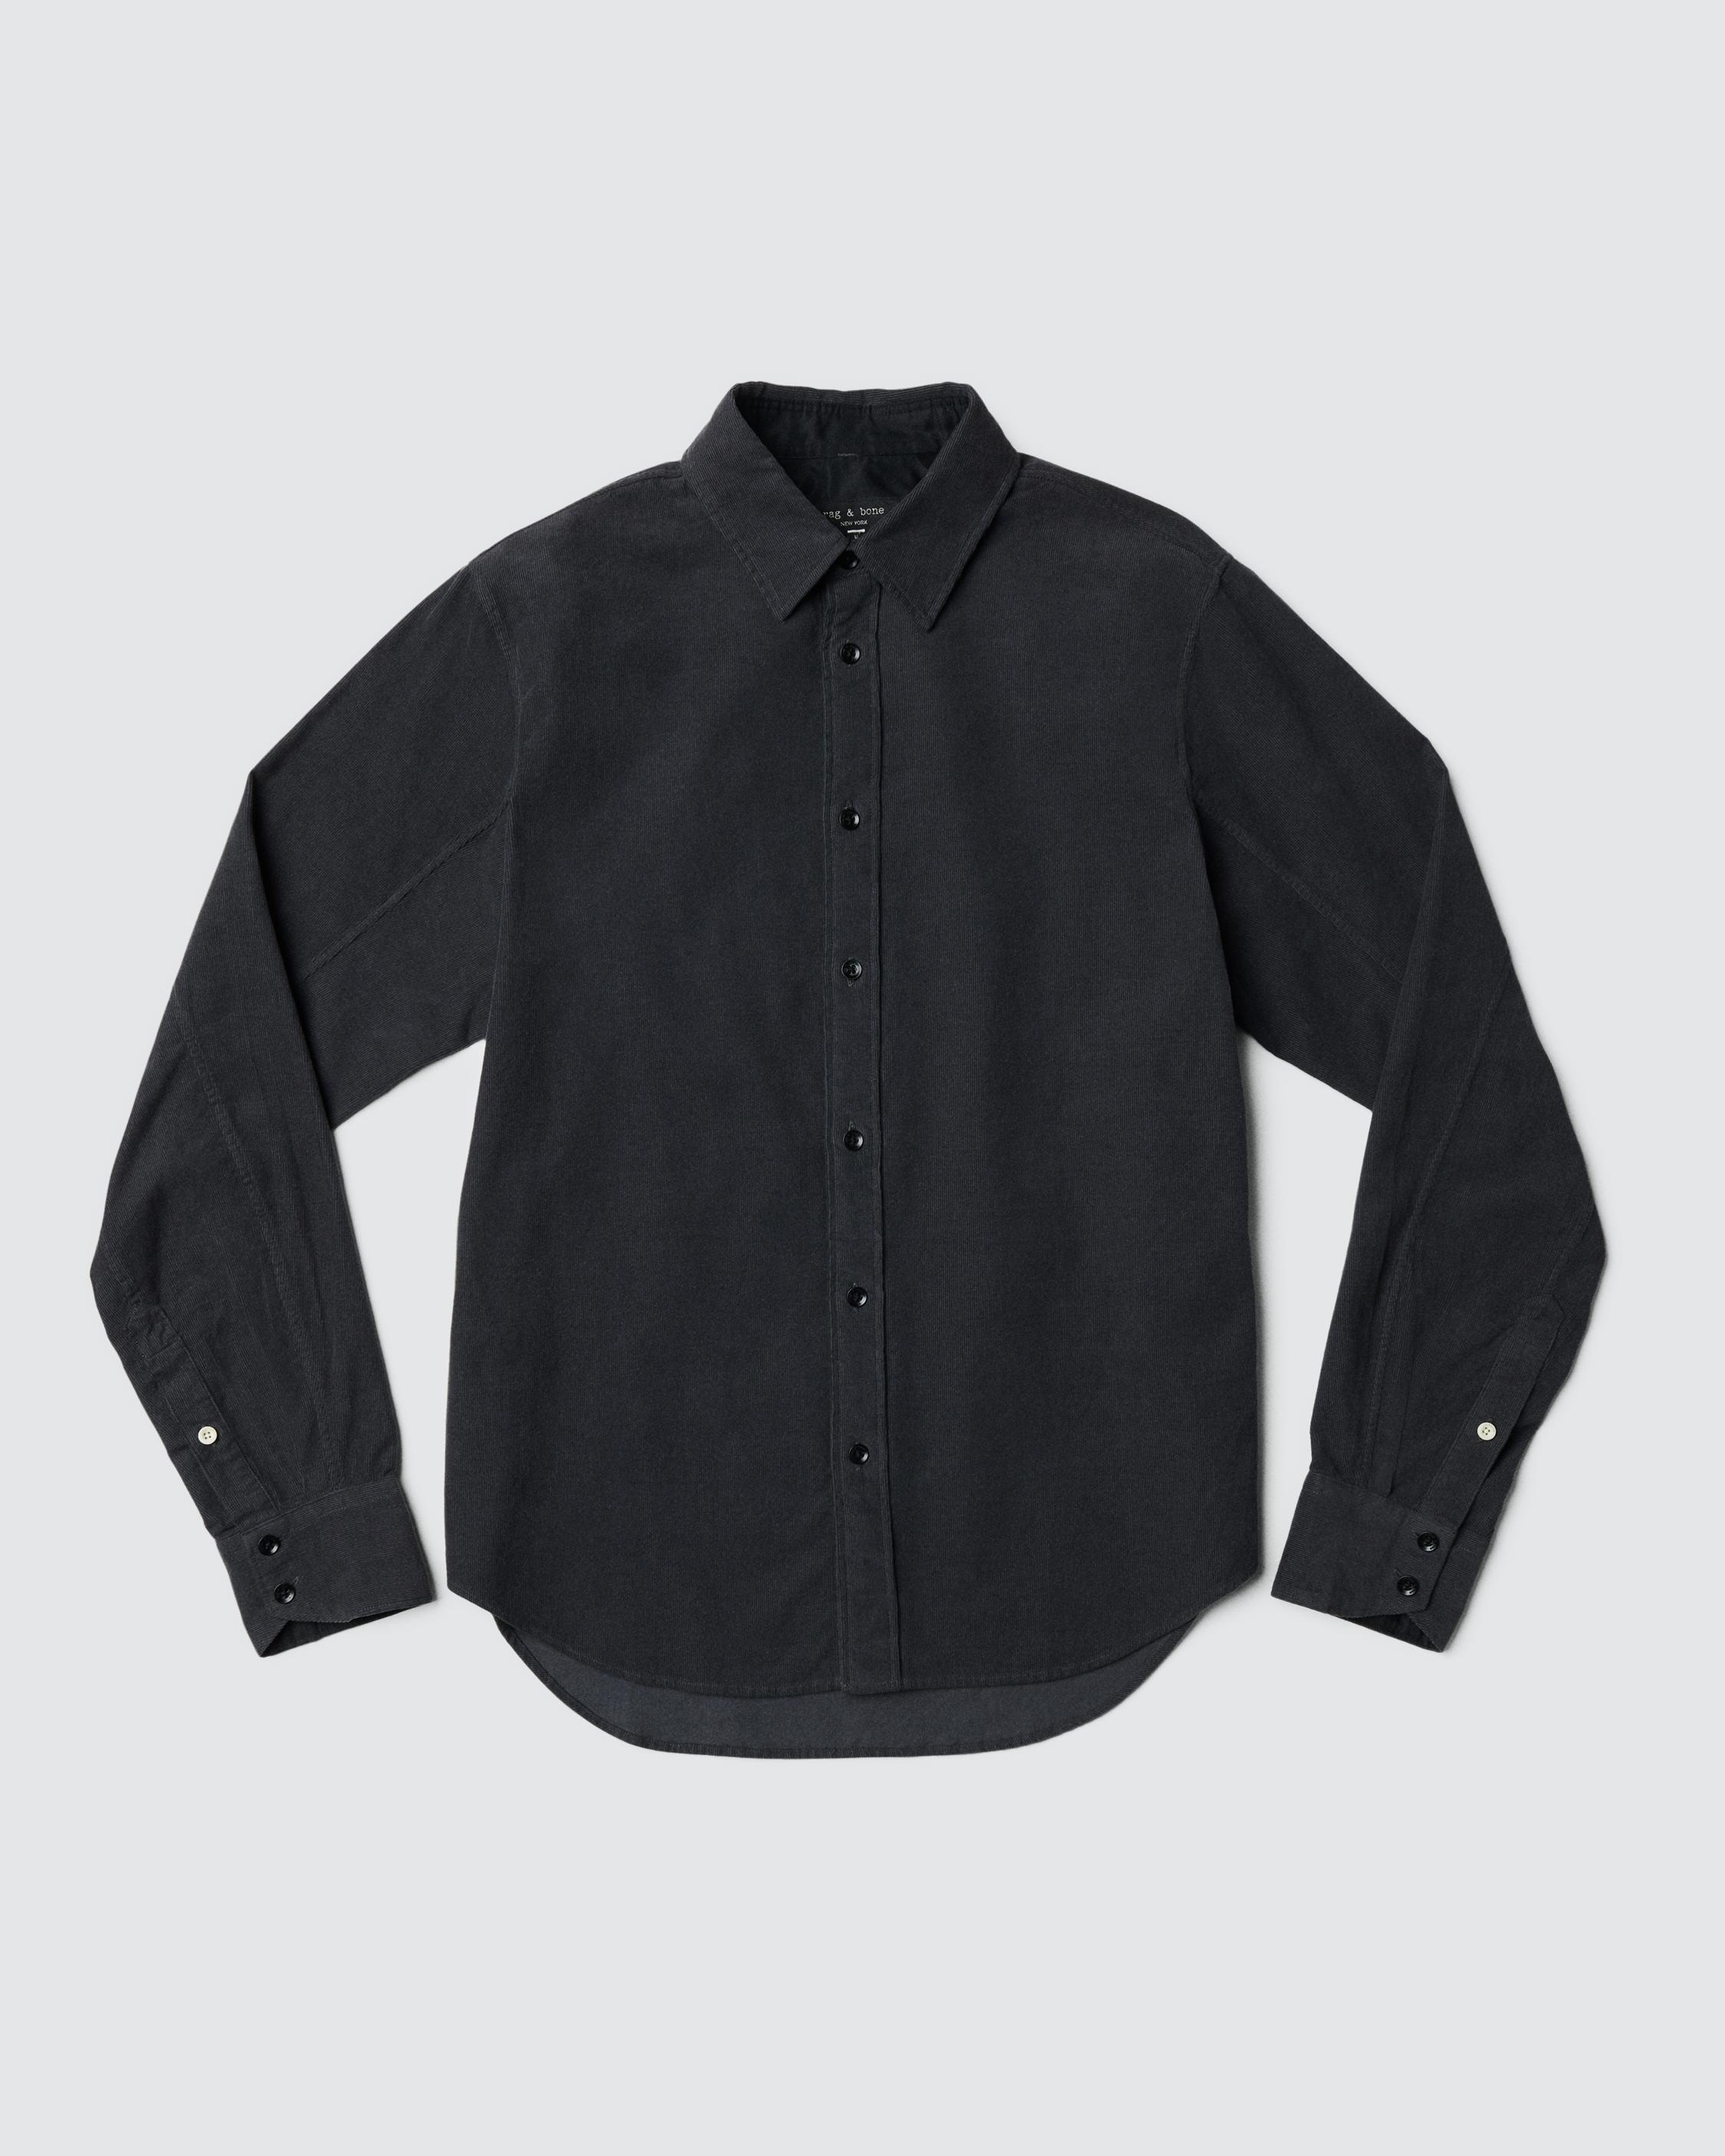 Fit 2 Corduroy Engineered Shirt
Relaxed Fit Button Down - 1